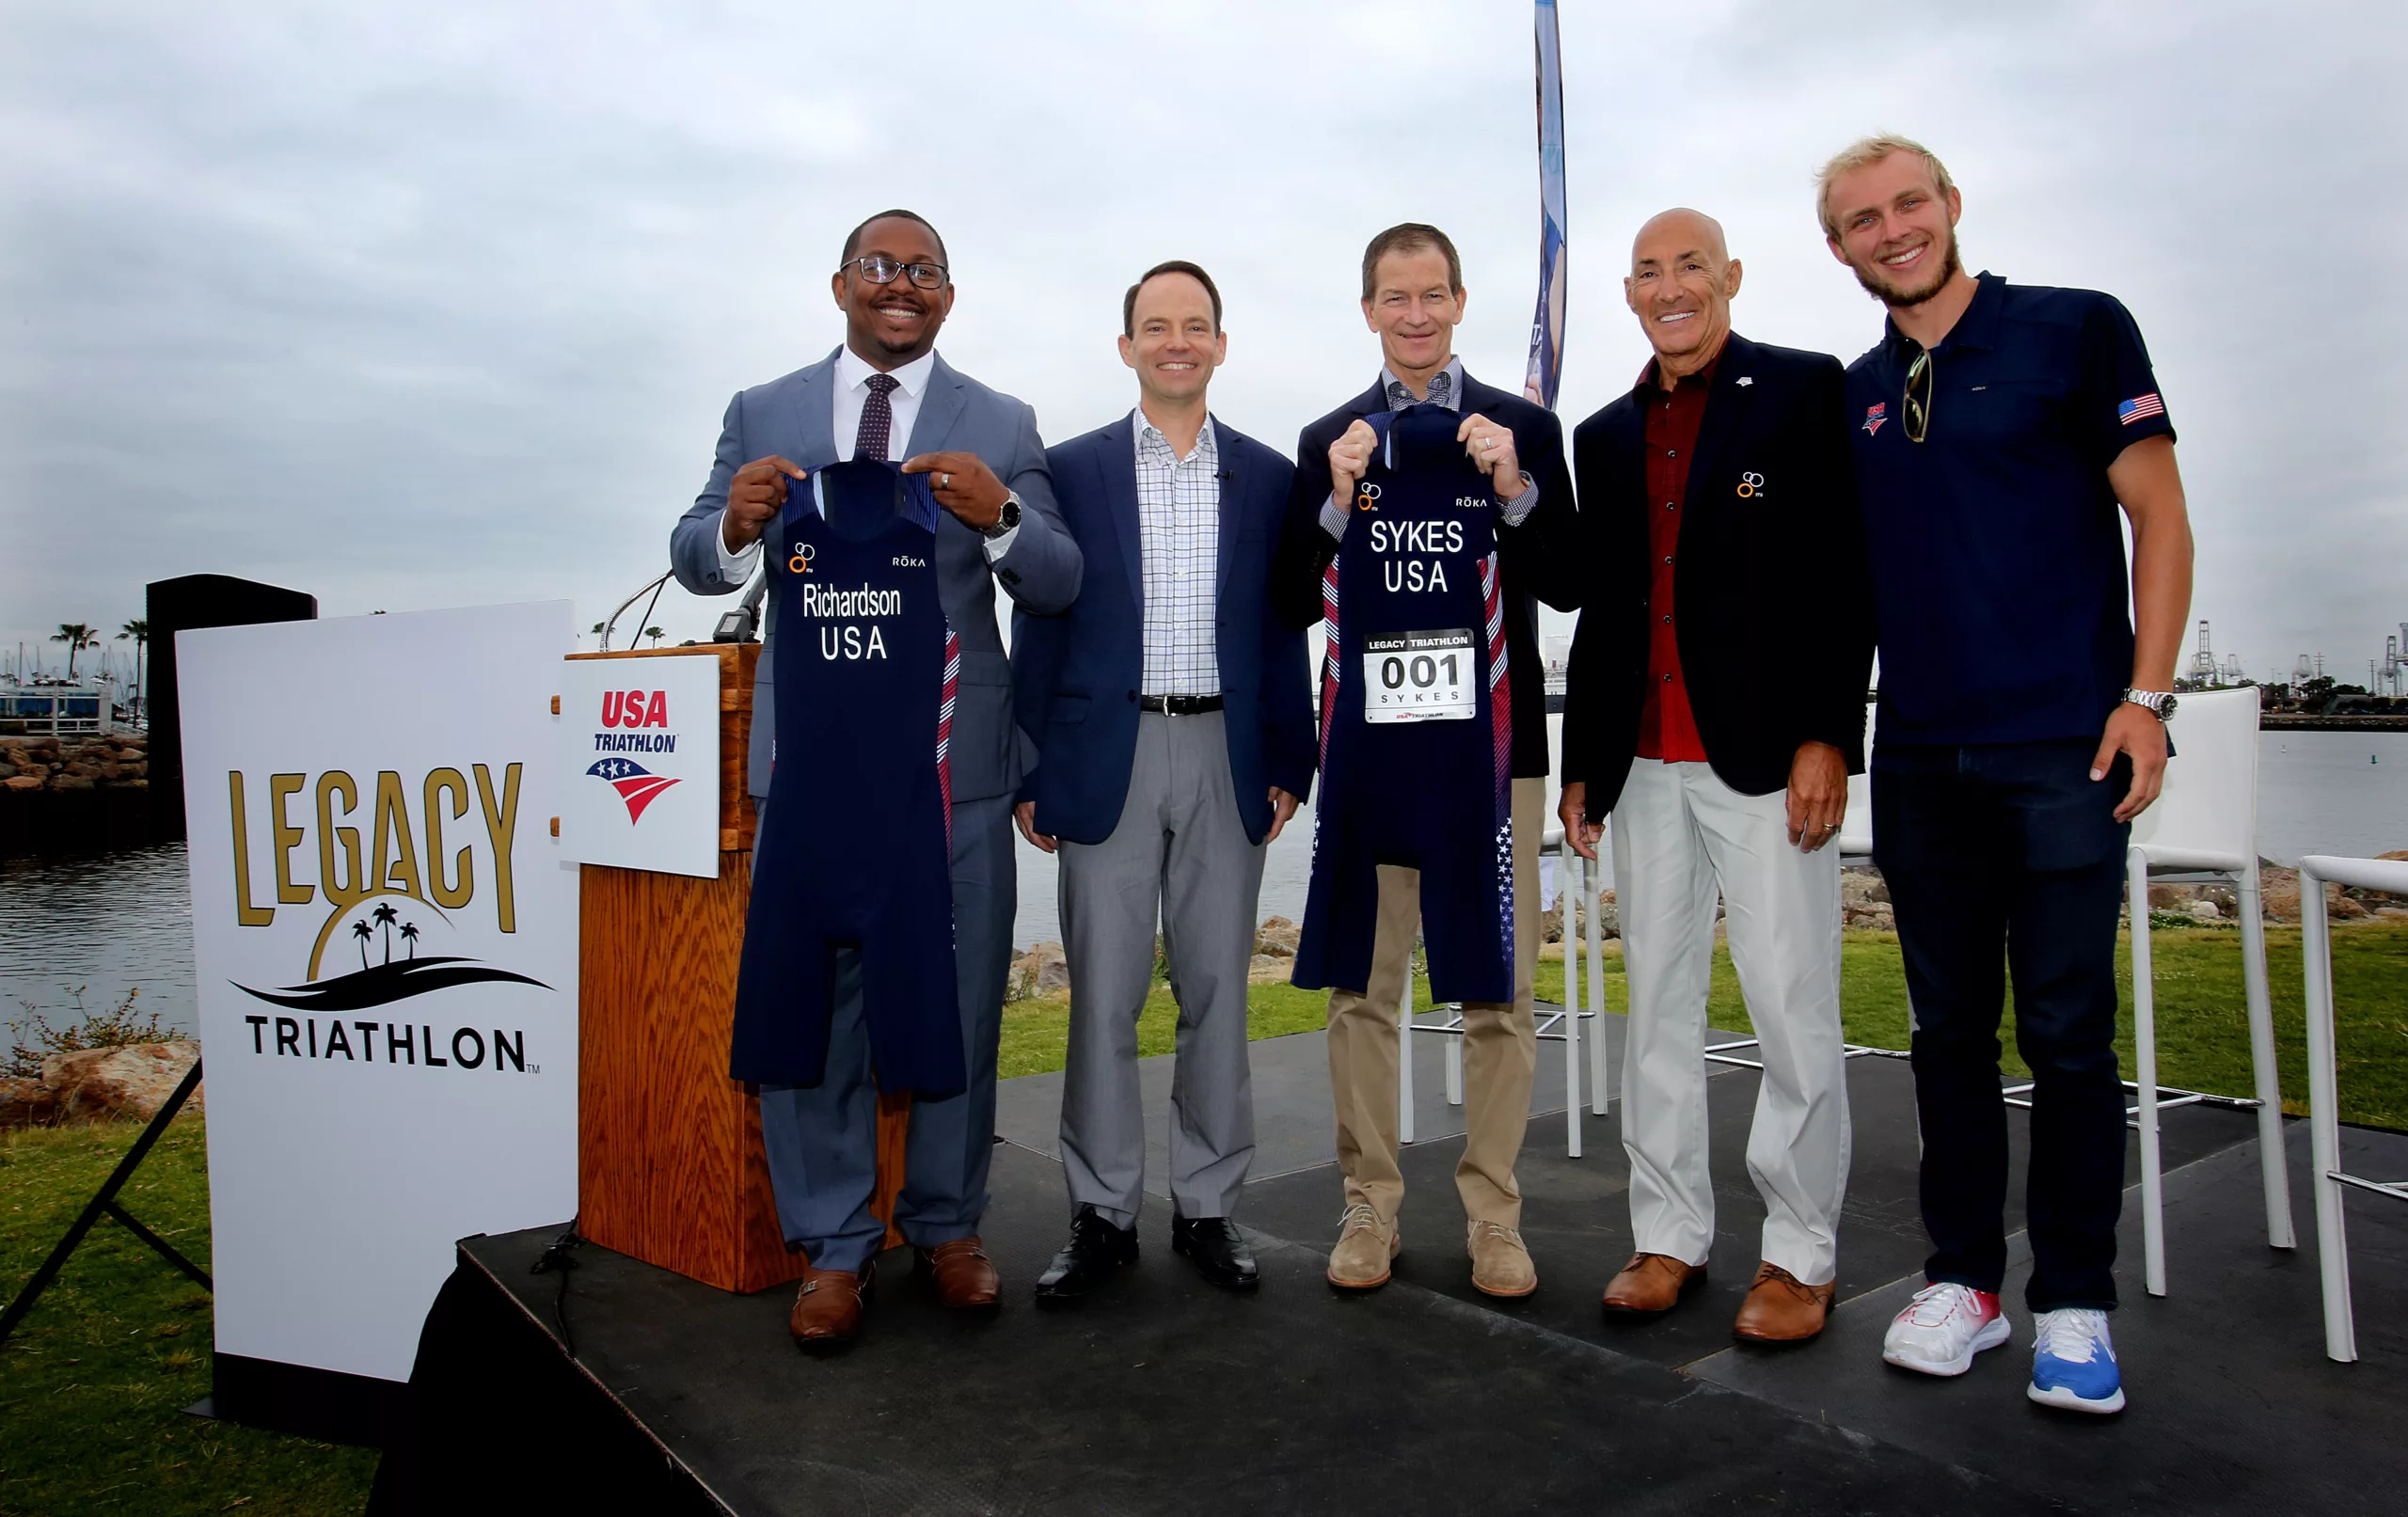 Five men at Legacy Triathlon event holding race number bibs by the sea